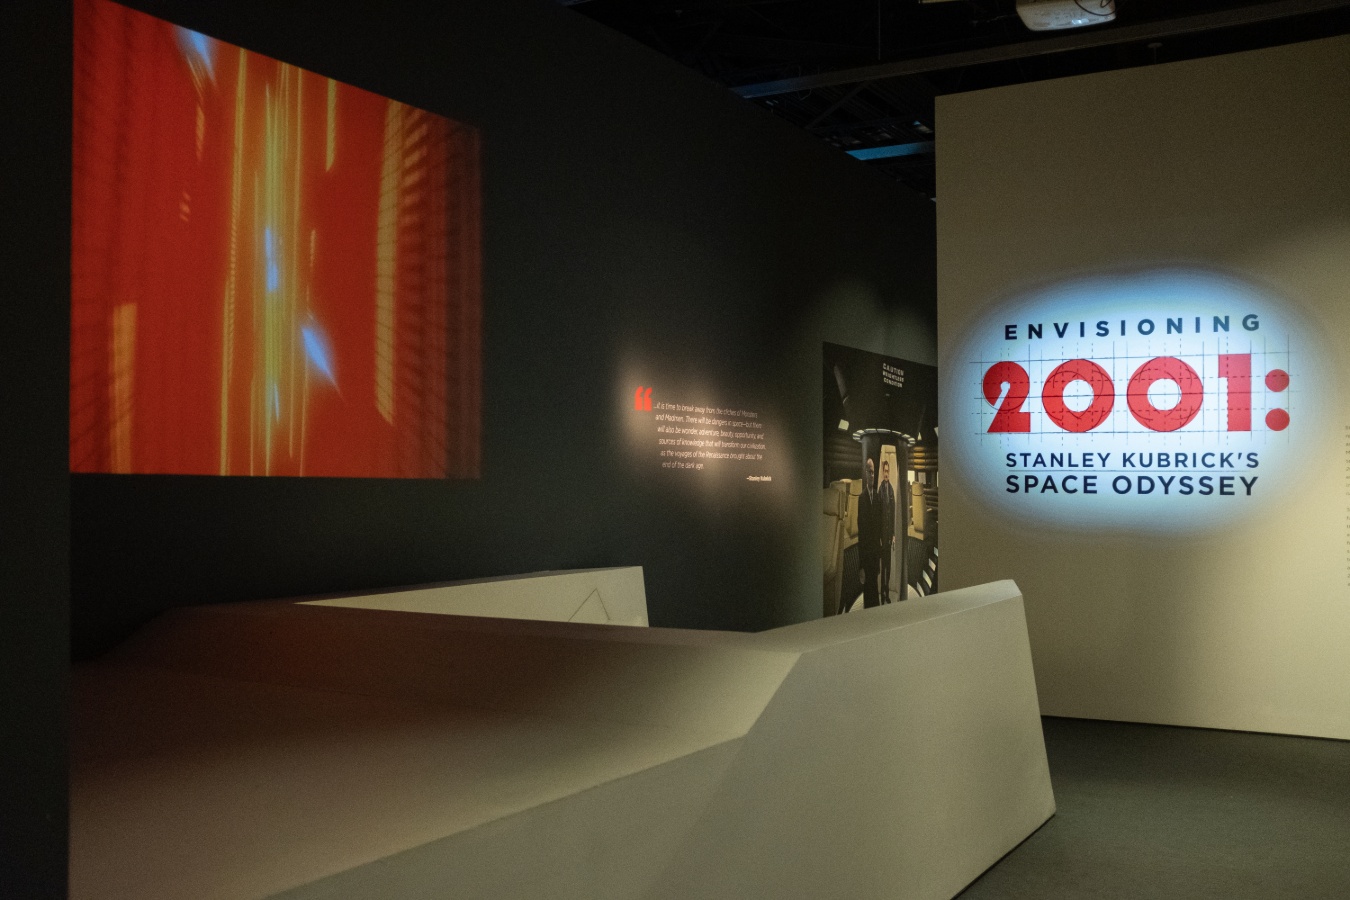 Envisioning 2001: A Space Odyssey, an exhibit at The Museum of